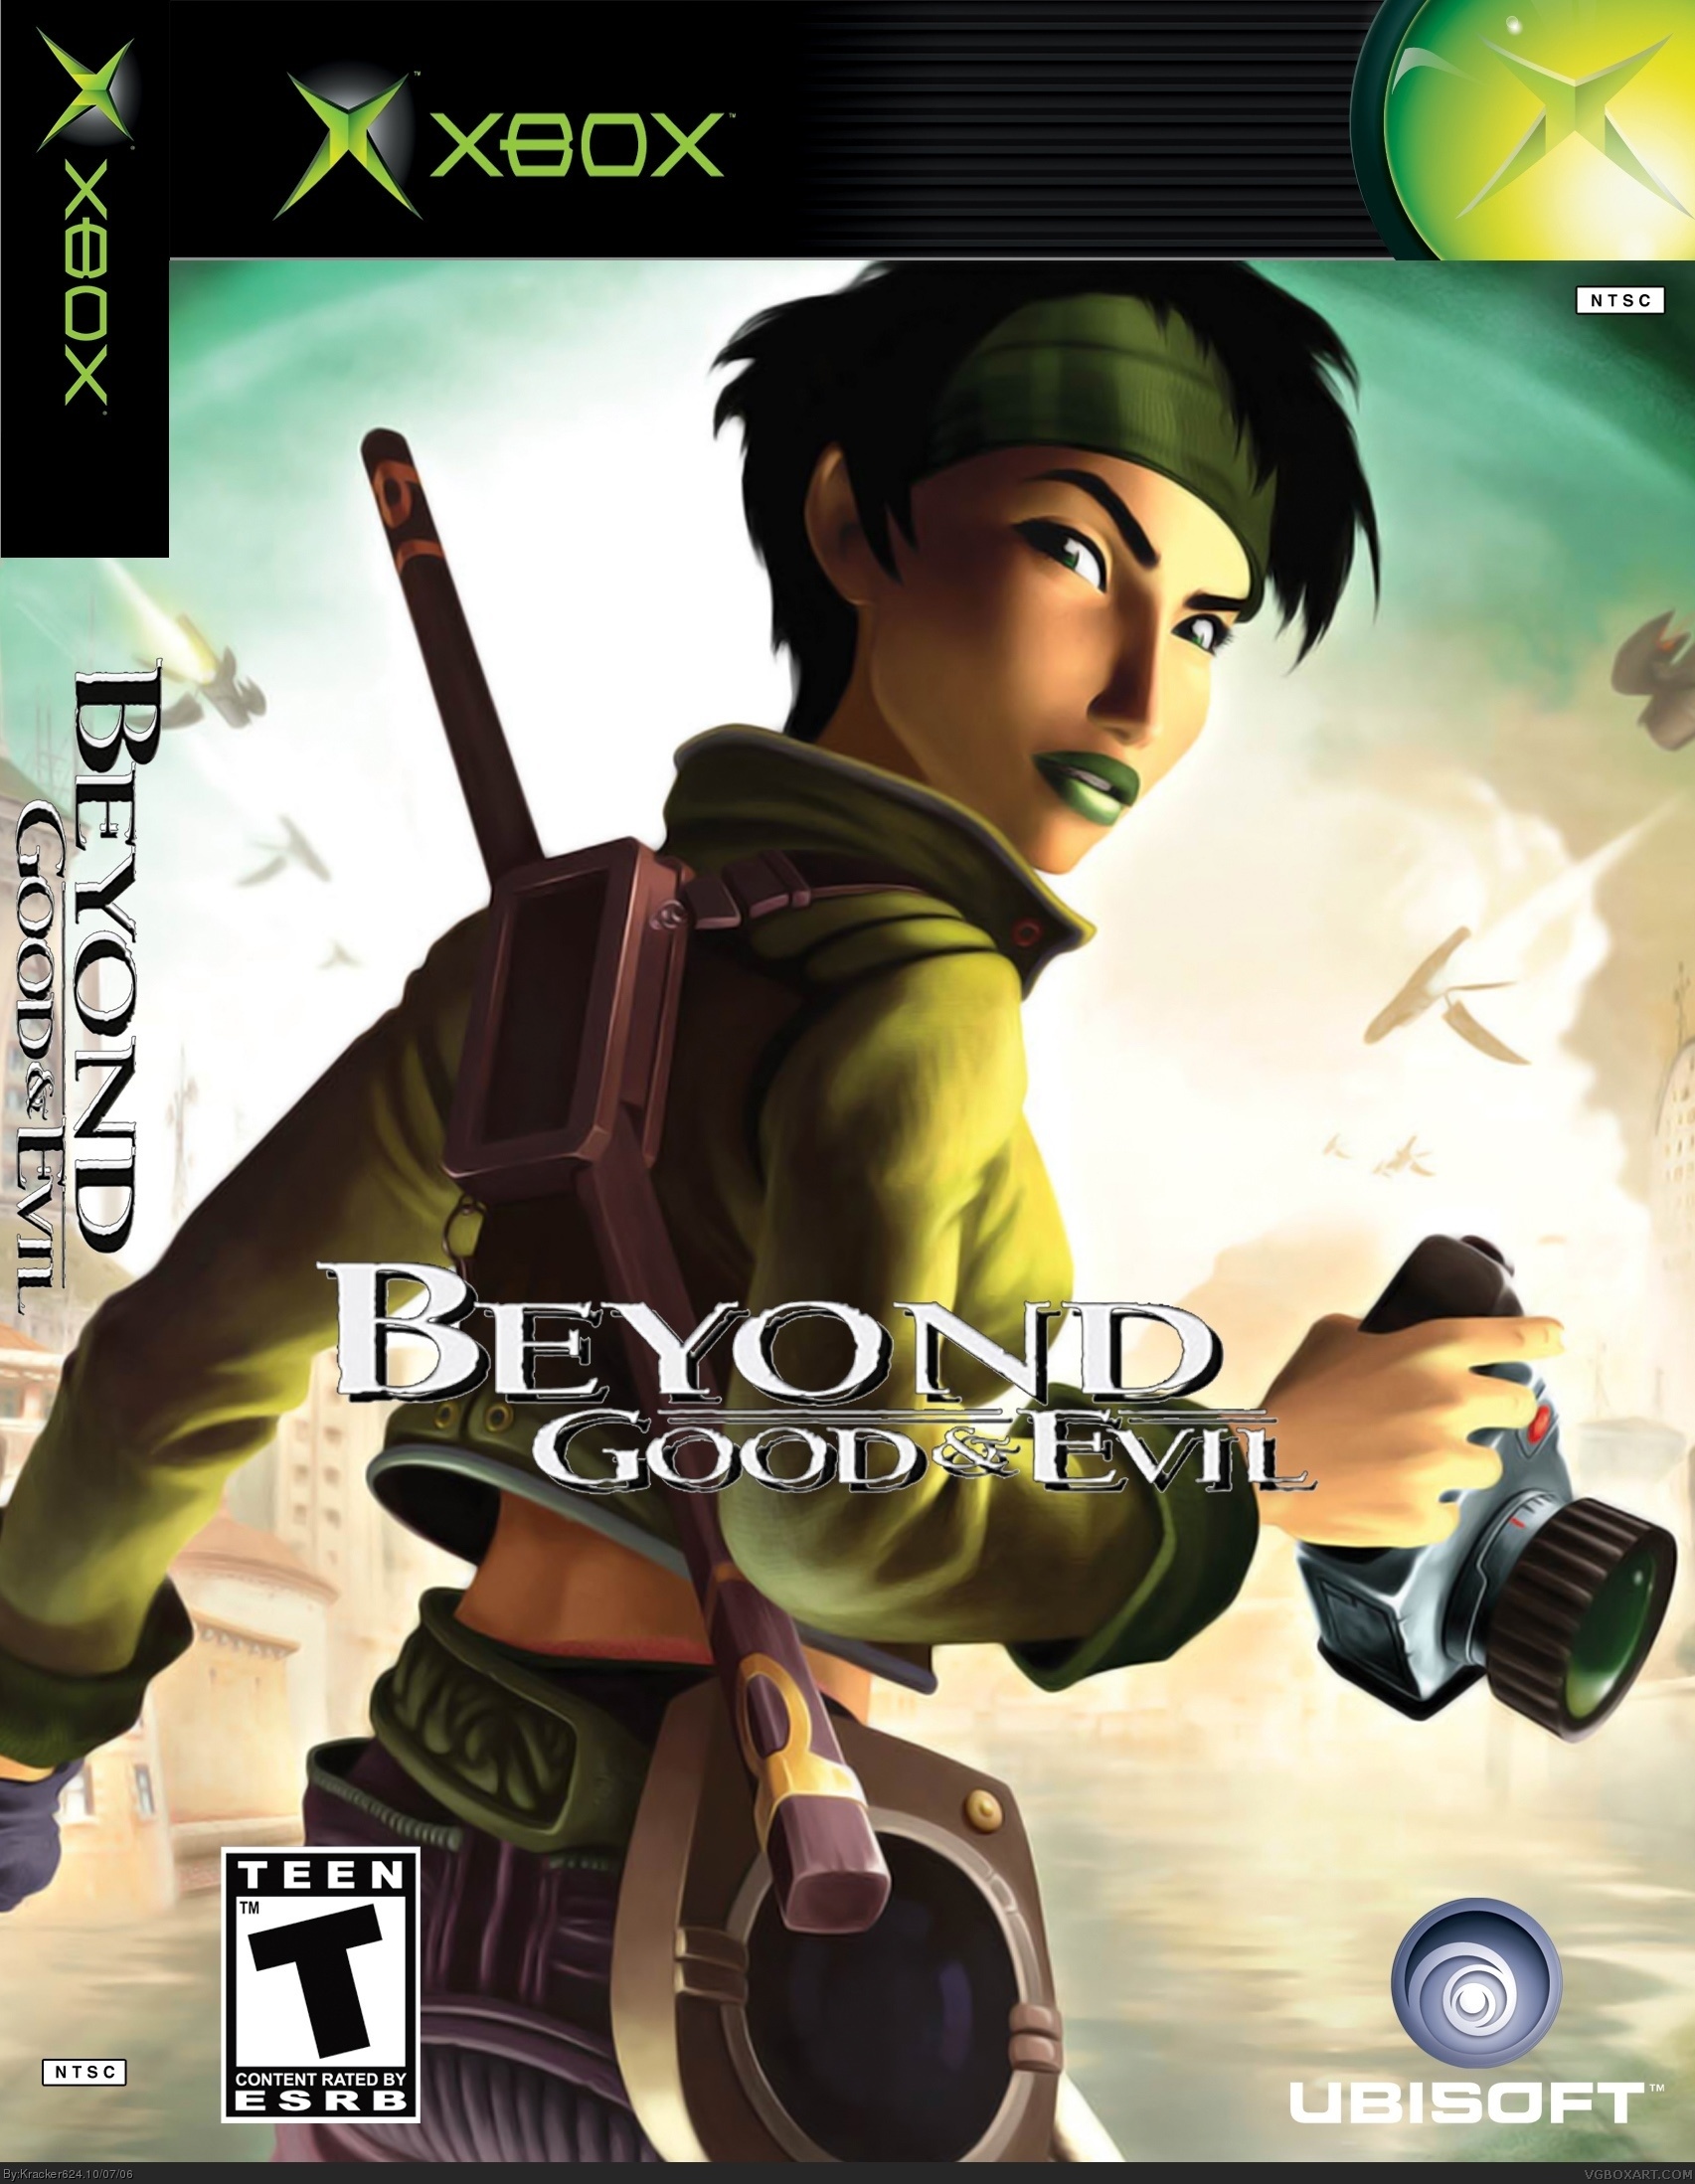 beyond good and evil audio book